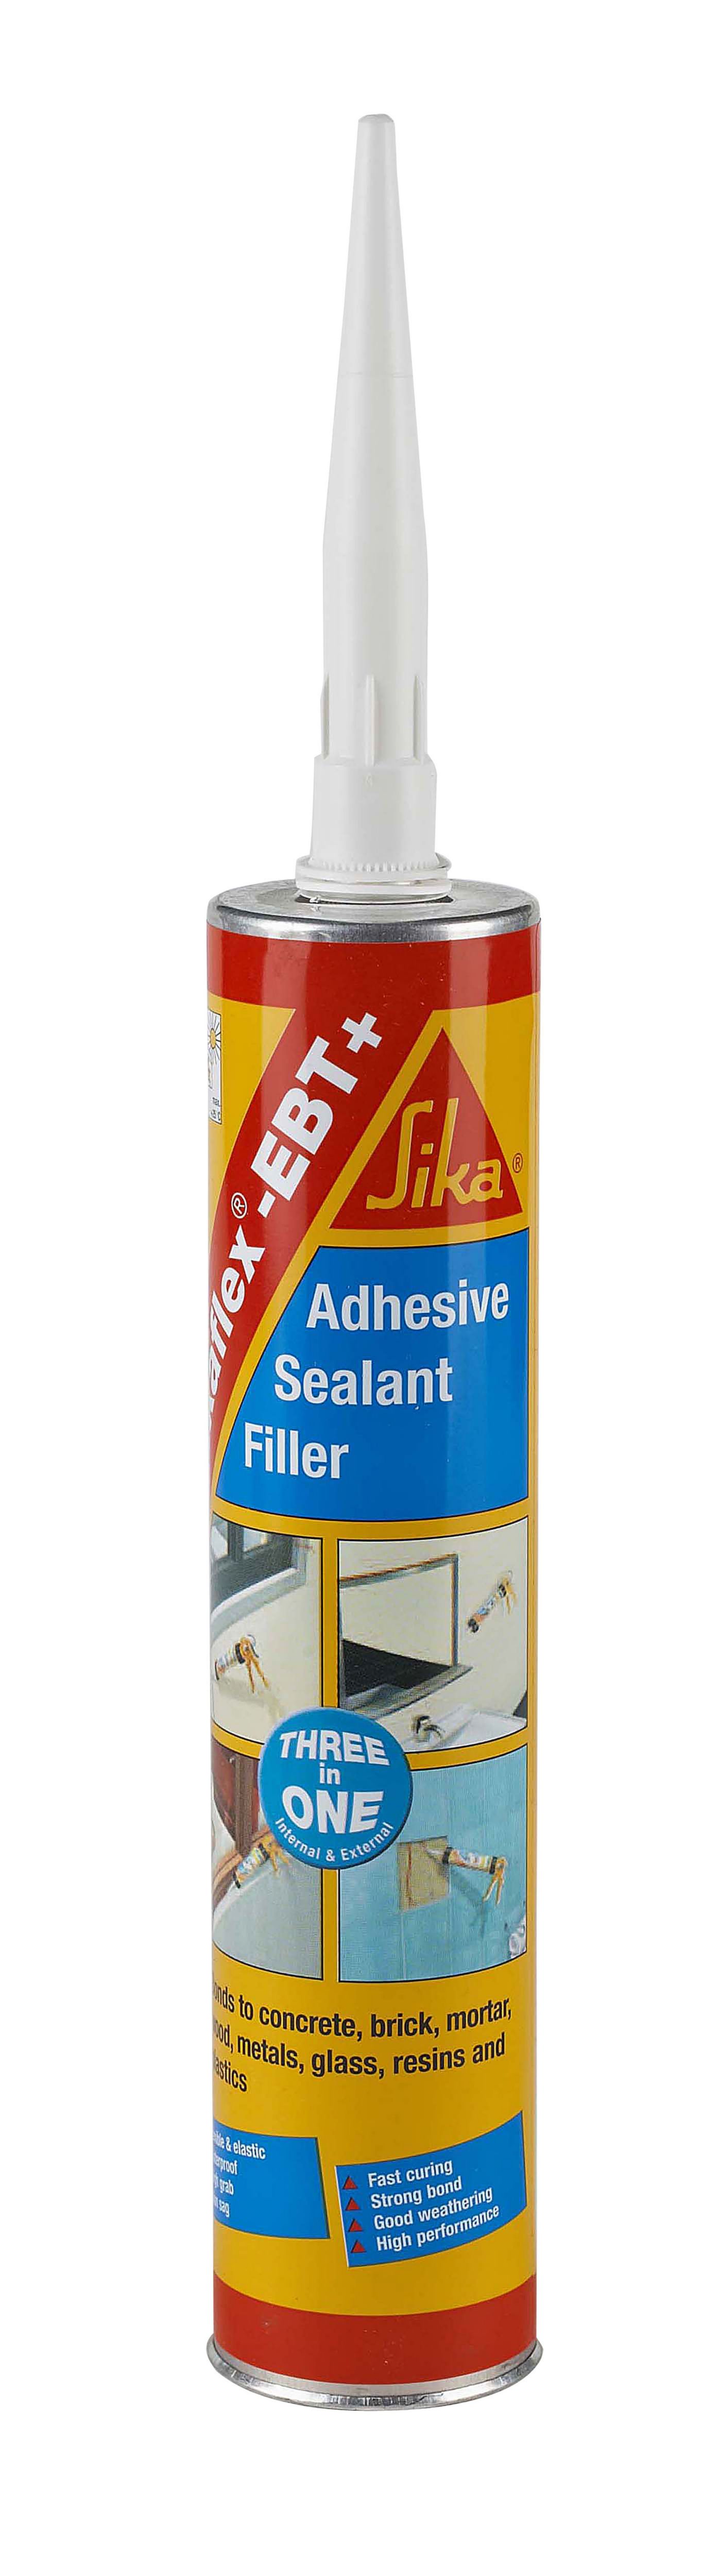 SIKA Sikaflex 11FC All in One Adhesive Sealant 300ml Box of 12